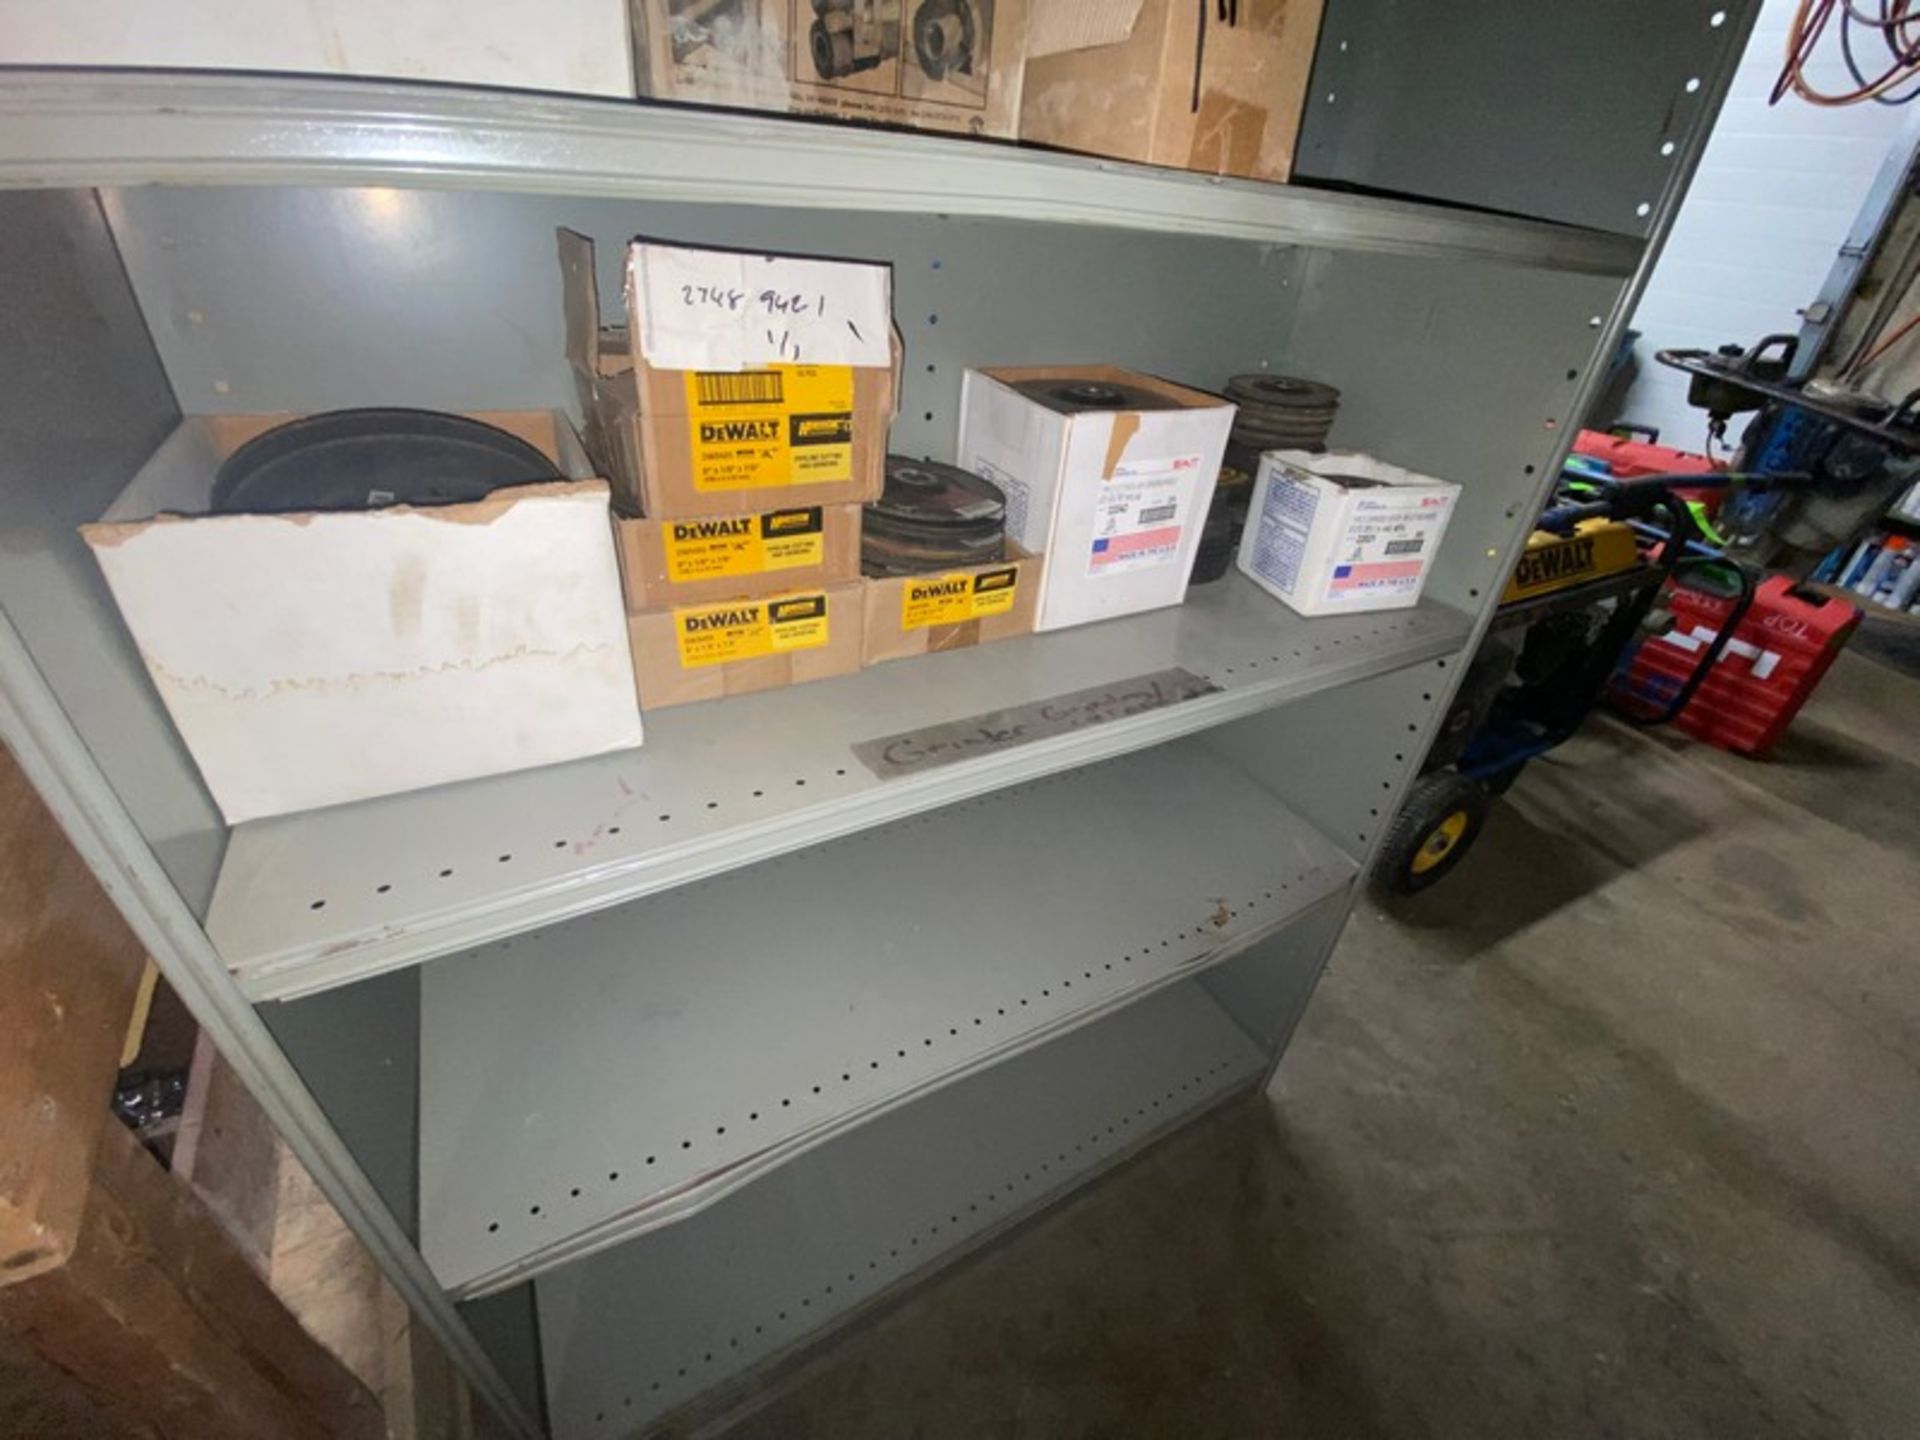 Shelf with Contents, Includes 2" Brushes, Boxes of DeWalt Pipeline Cutting & Grinding, with (2) - Bild 7 aus 10